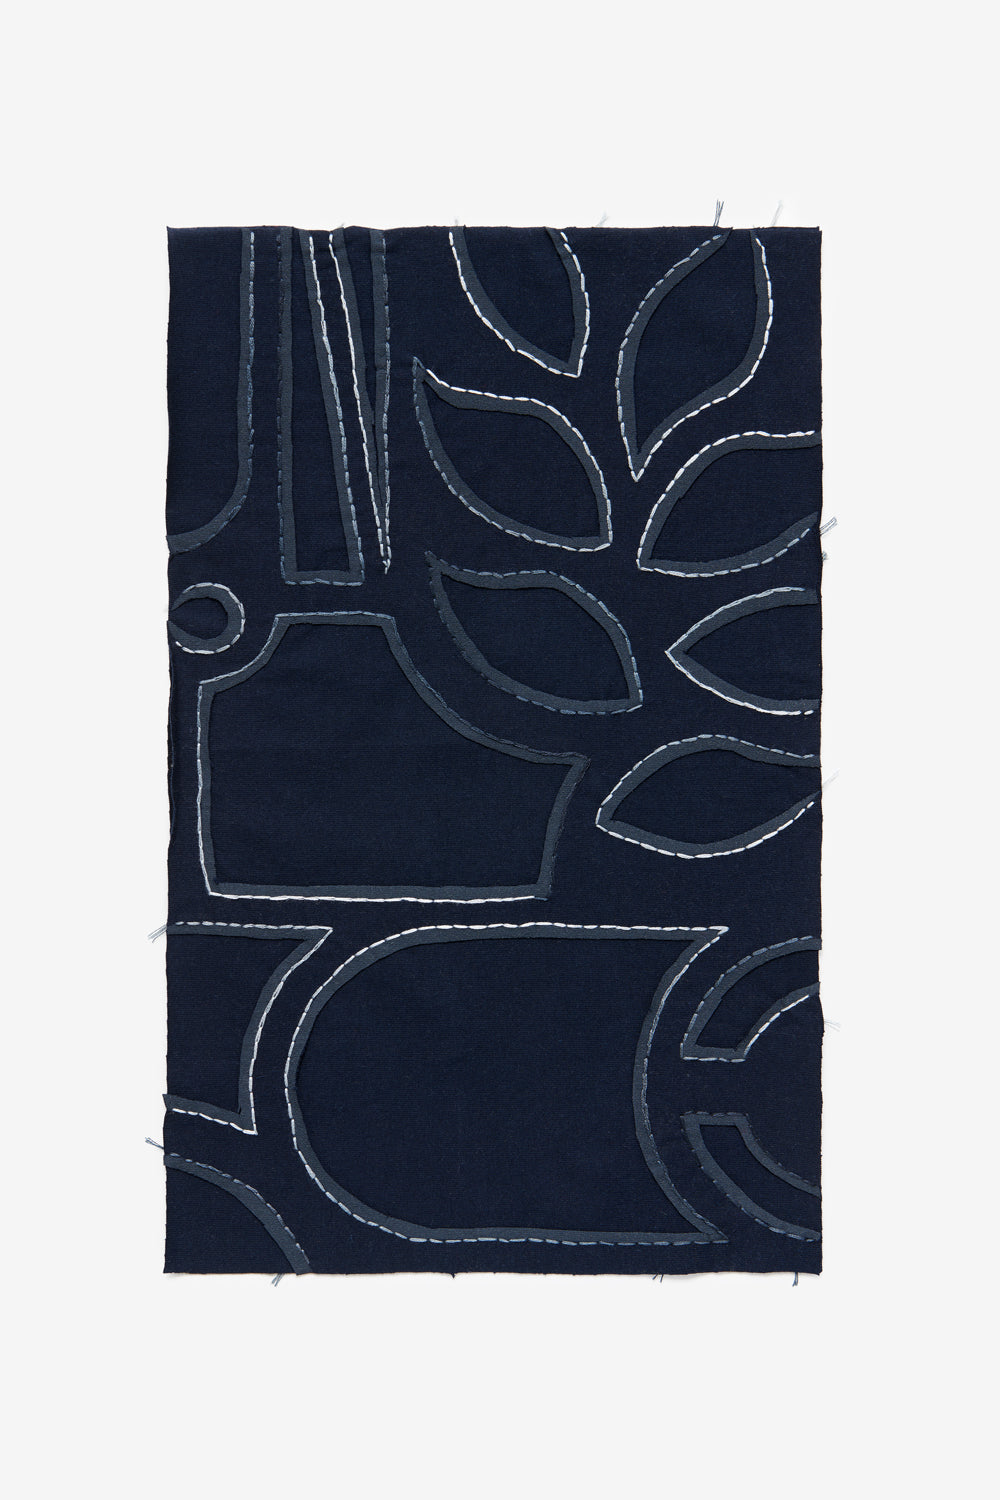 The School of Making fabric swatch in navy and multi colored floss with Abstract design.